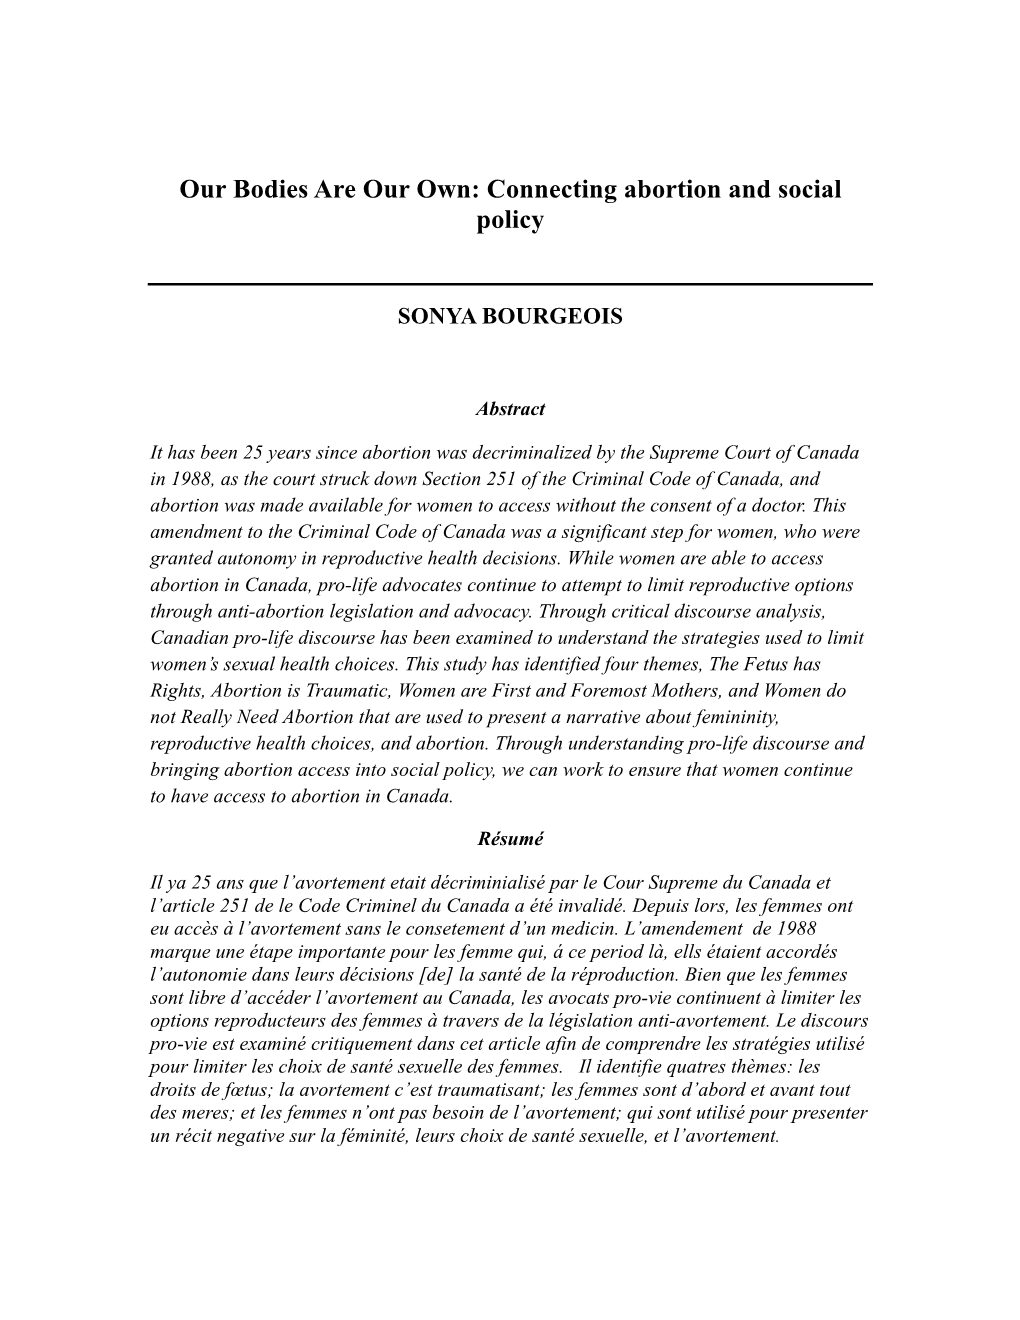 Our Bodies Are Our Own: Connecting Abortion and Social Policy